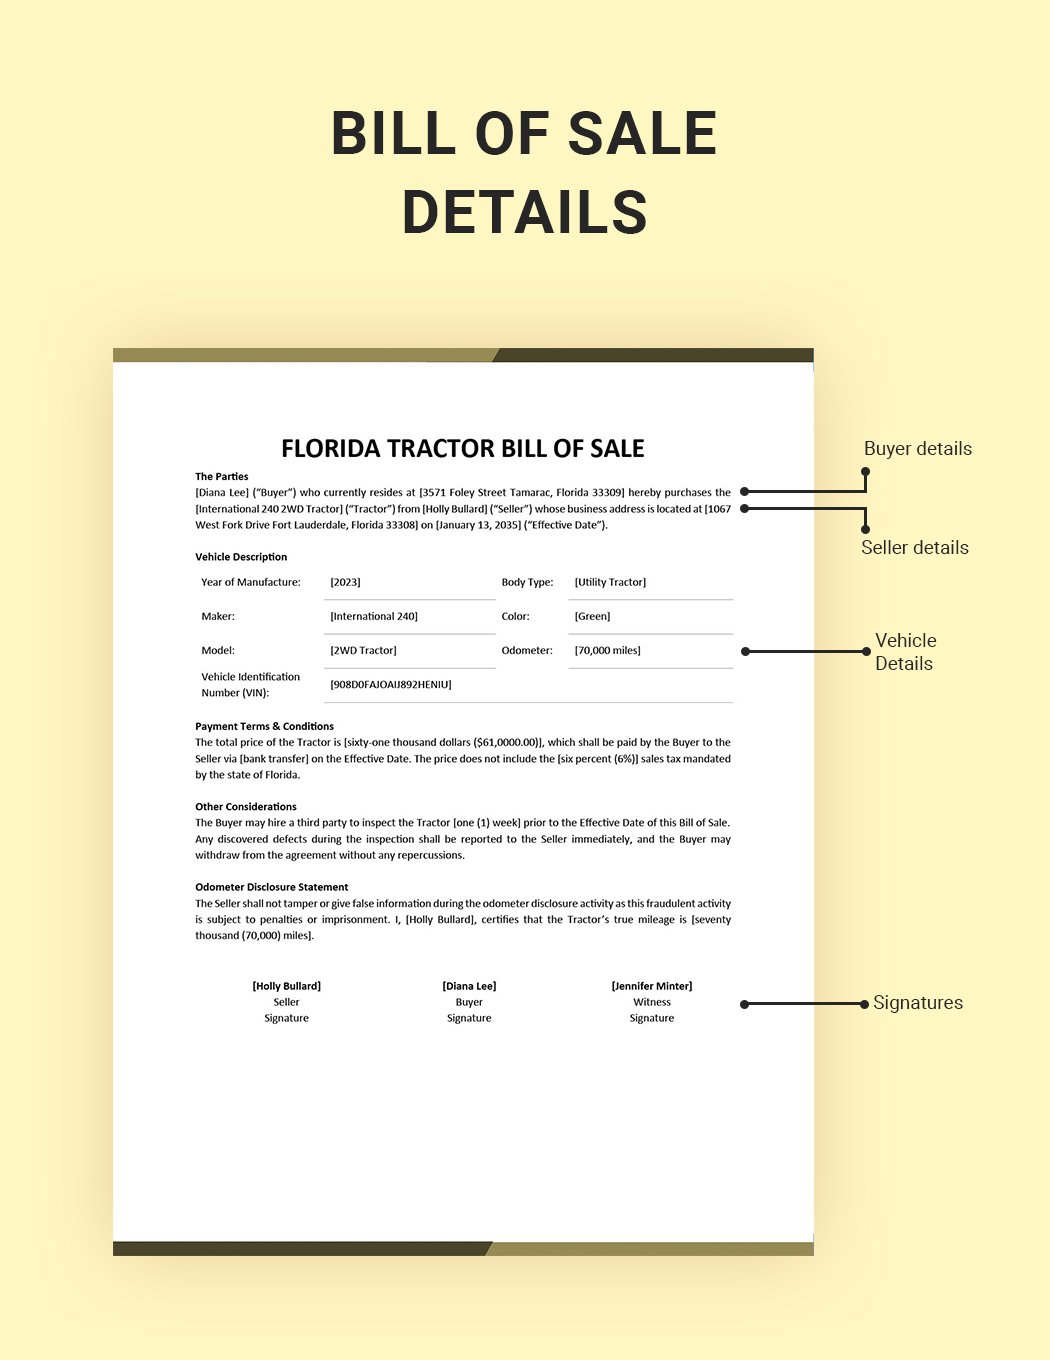 Florida Tractor Bill of Sale Template